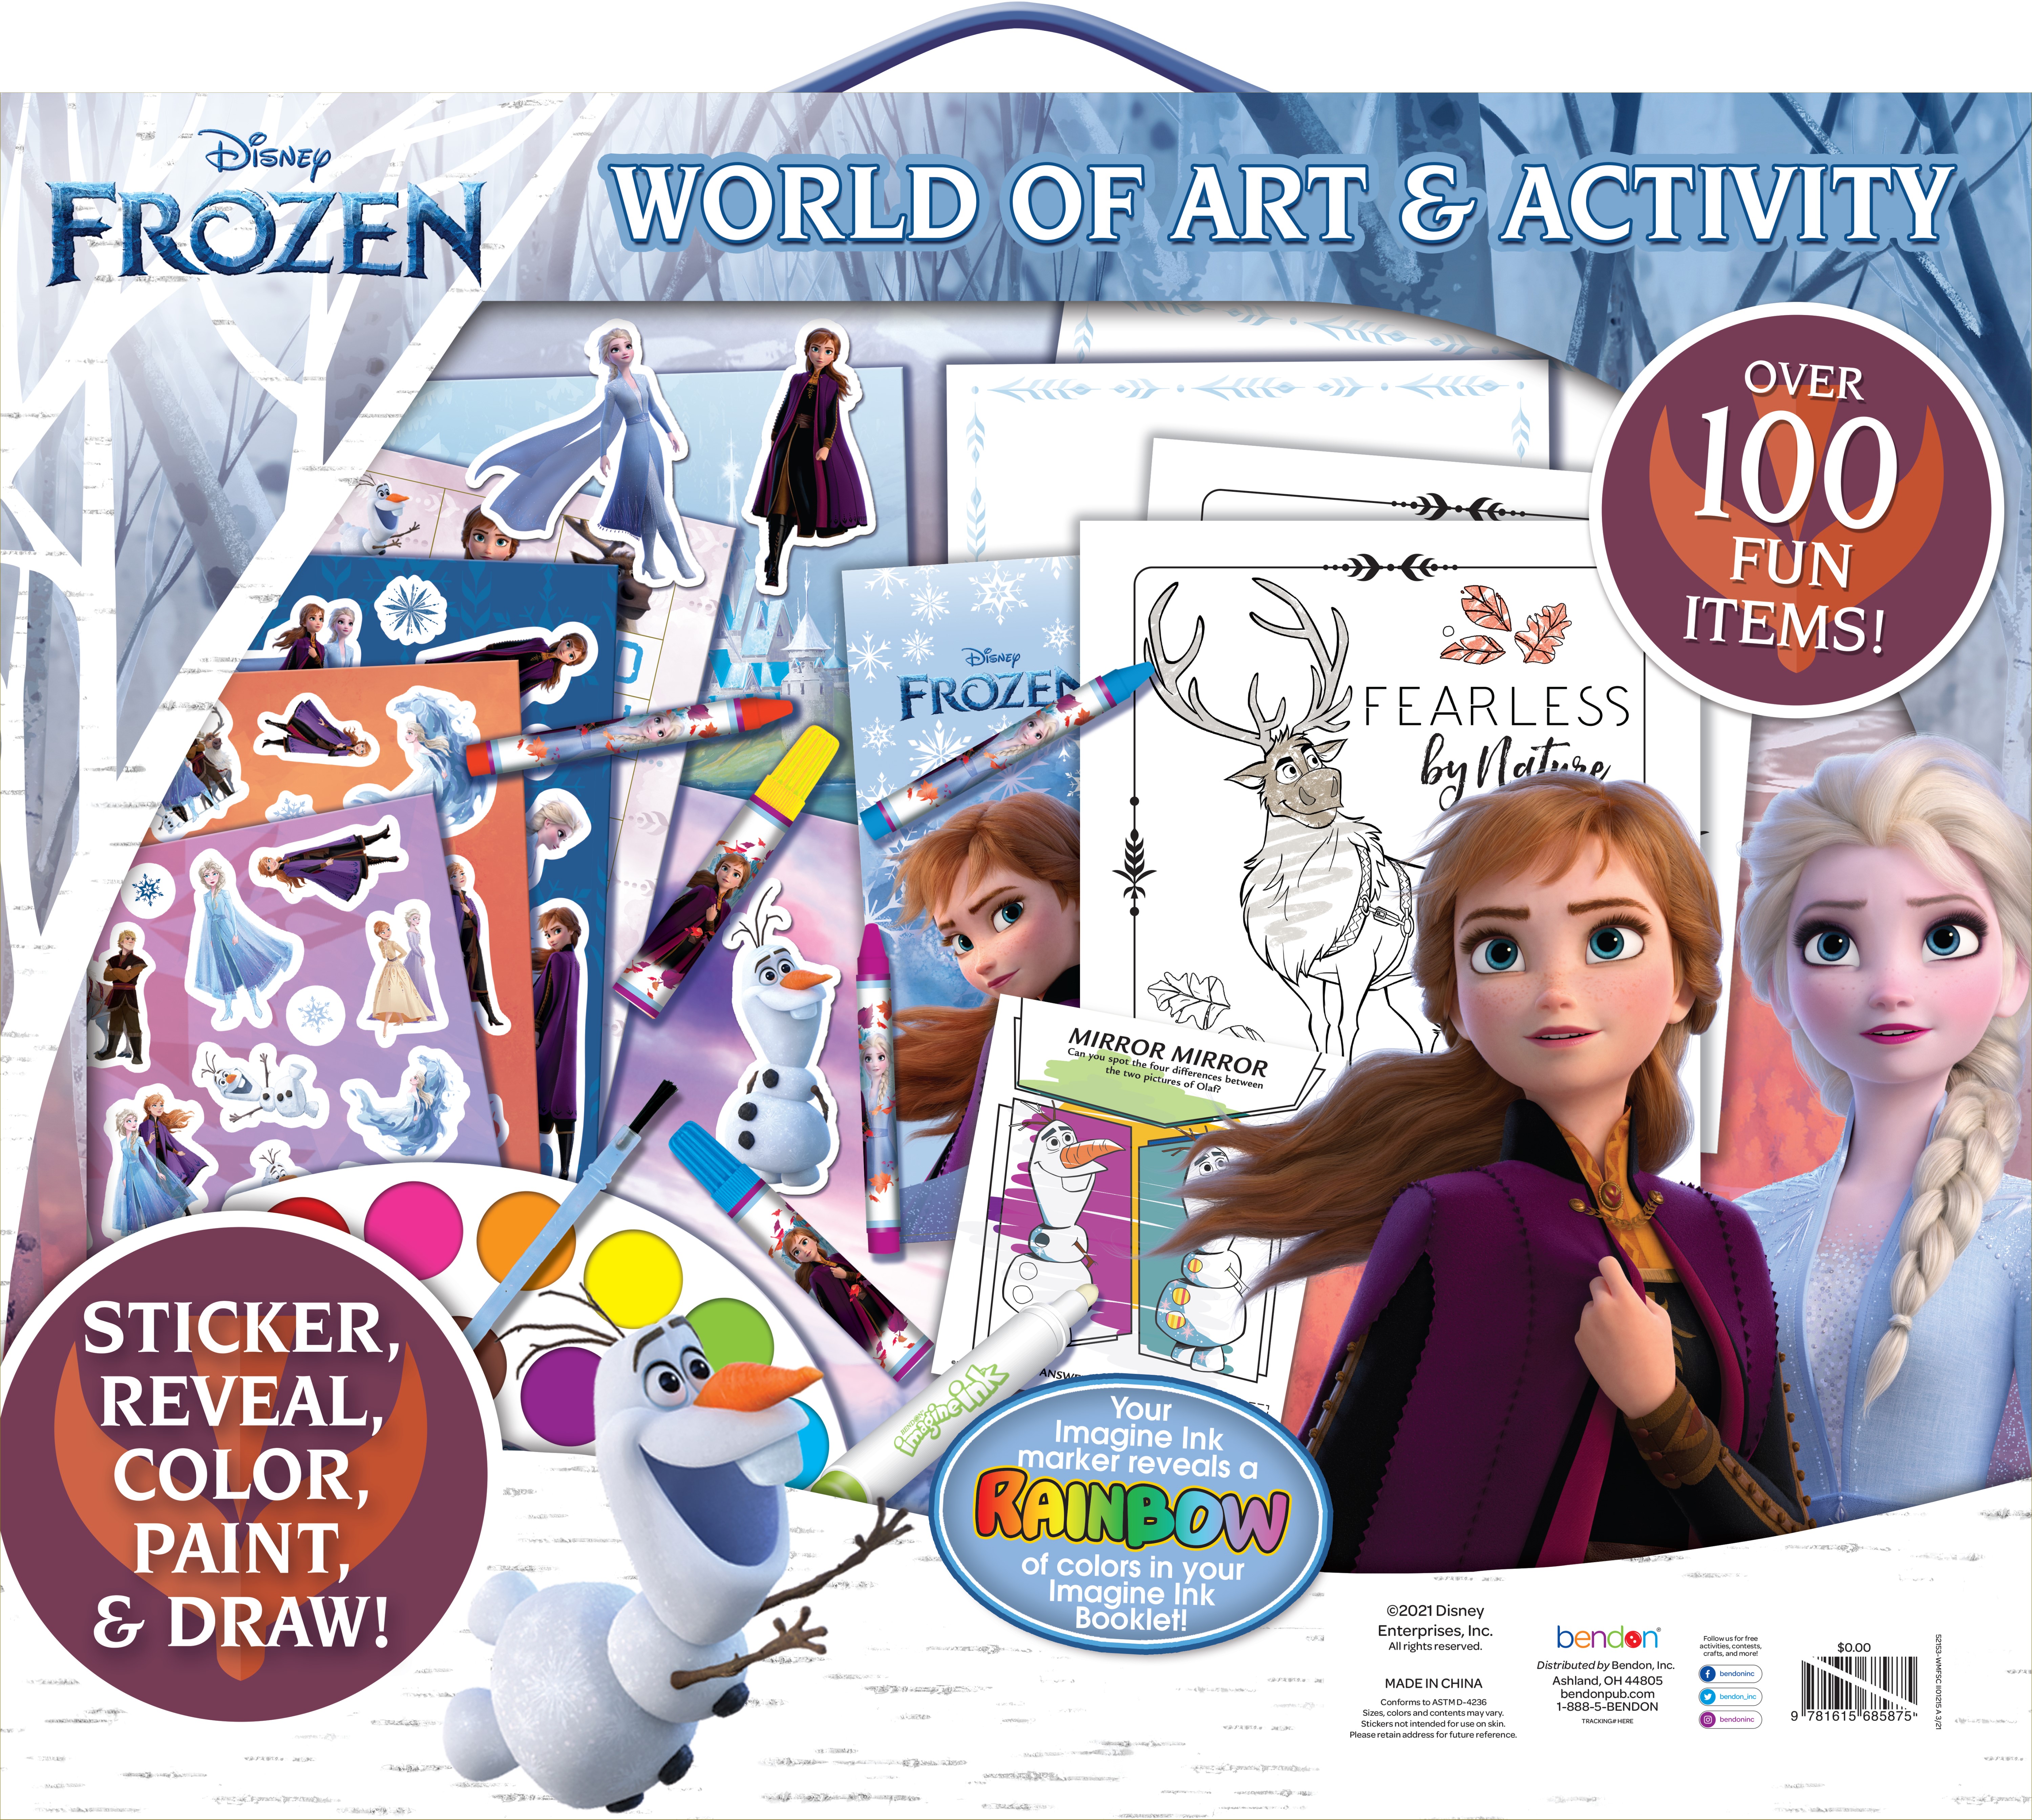 Disney Frozen World Of Art & Activity Kit with an Imagine Ink Book - image 2 of 8